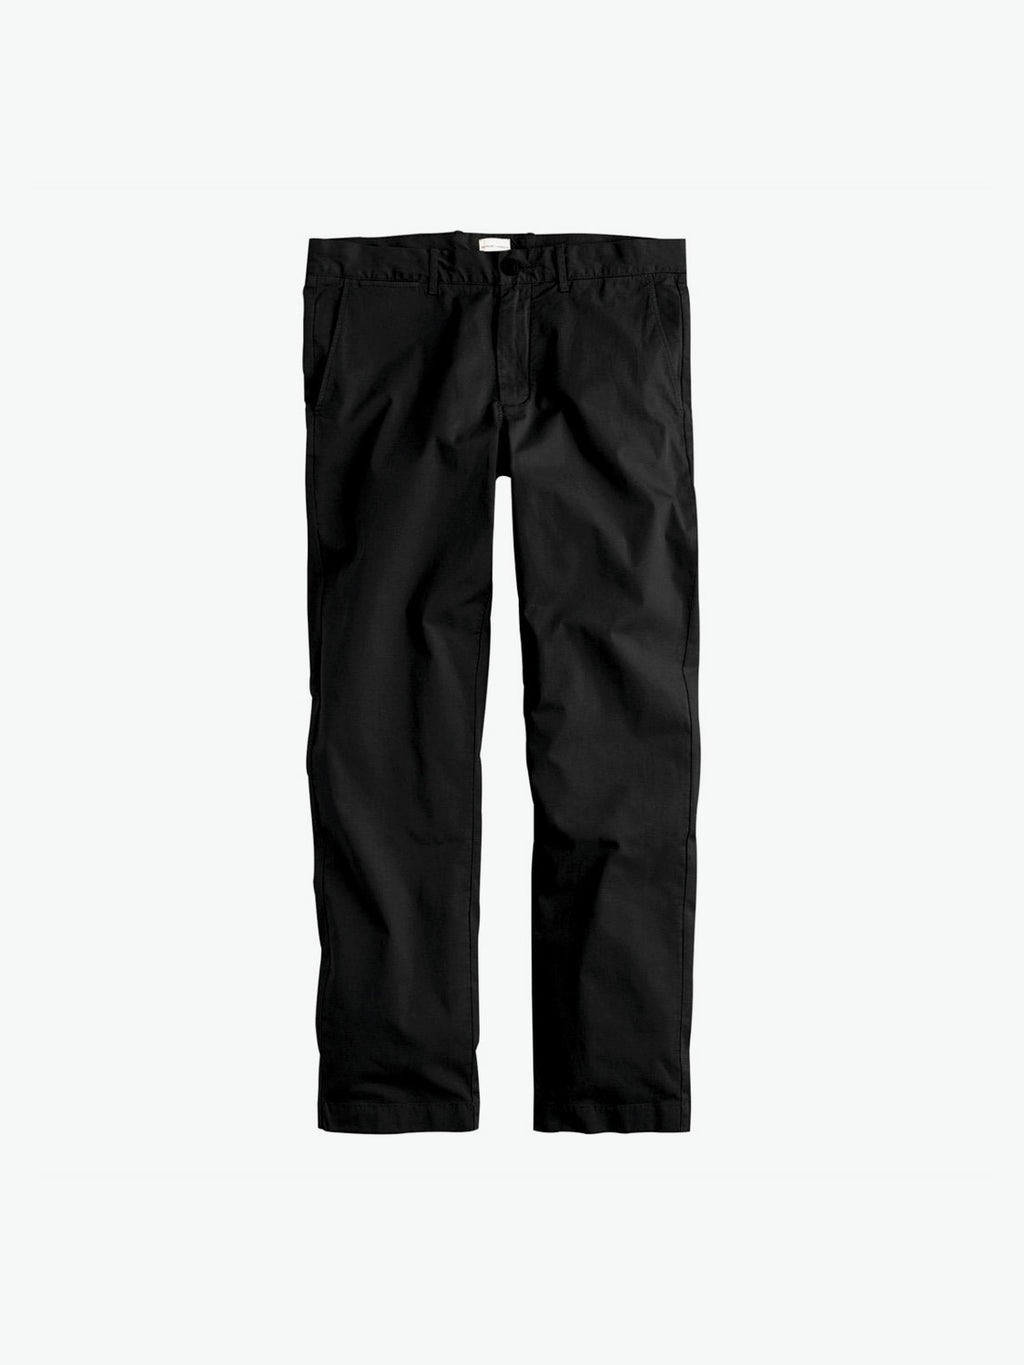 The Project Garments Regular Fit Cotton Blend Garment Washed Chino Pants Black